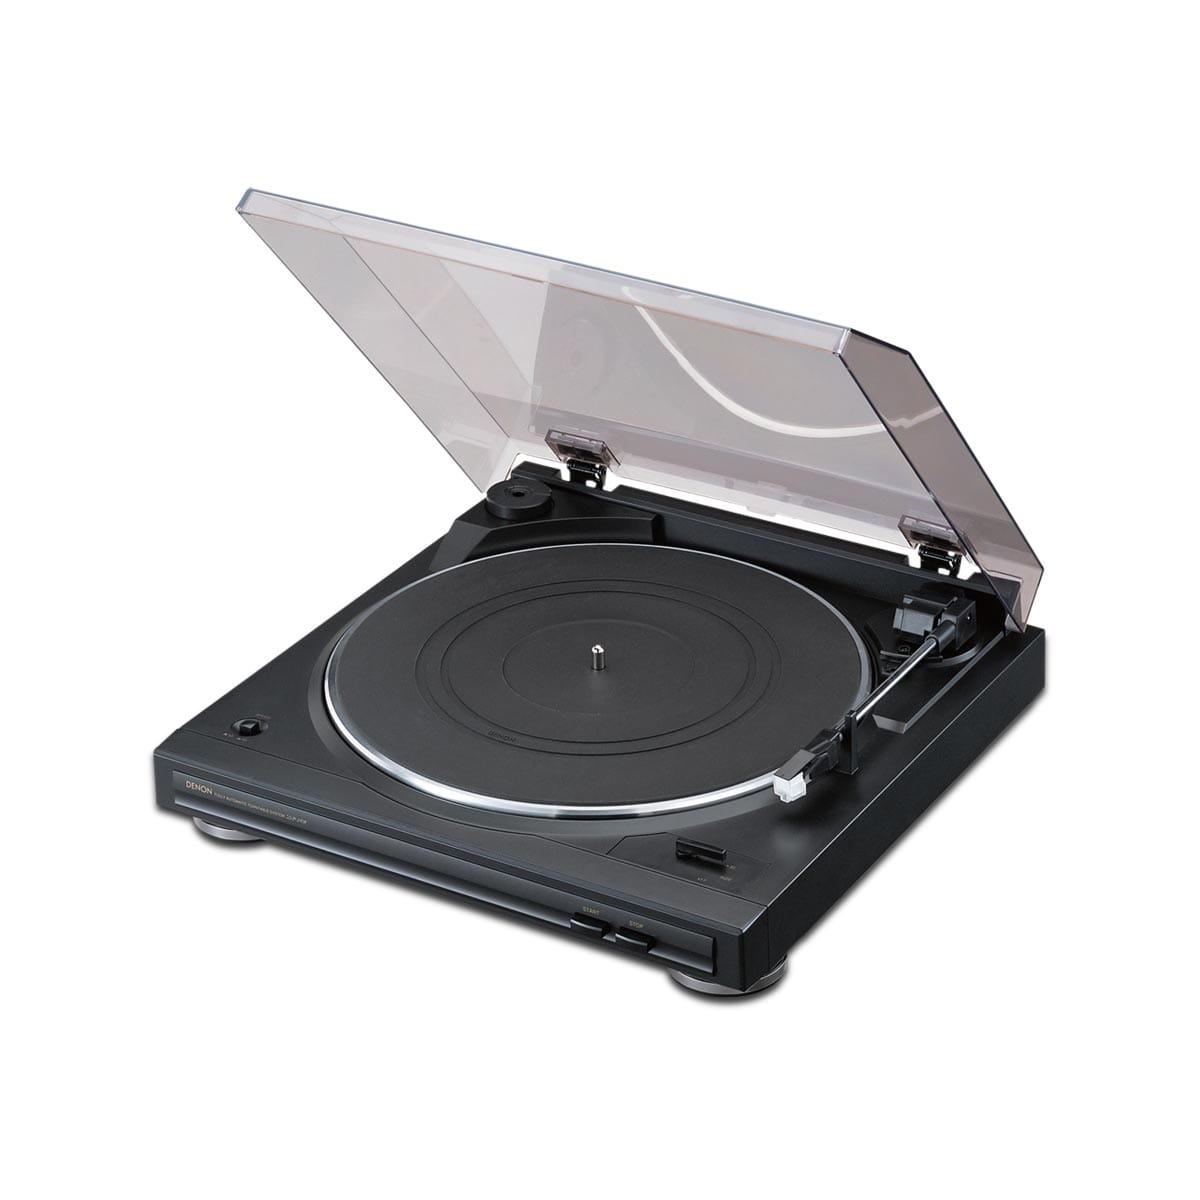 Denon Denon DP-29F Fully Automatic Turntable with Phono Preamp Turntables